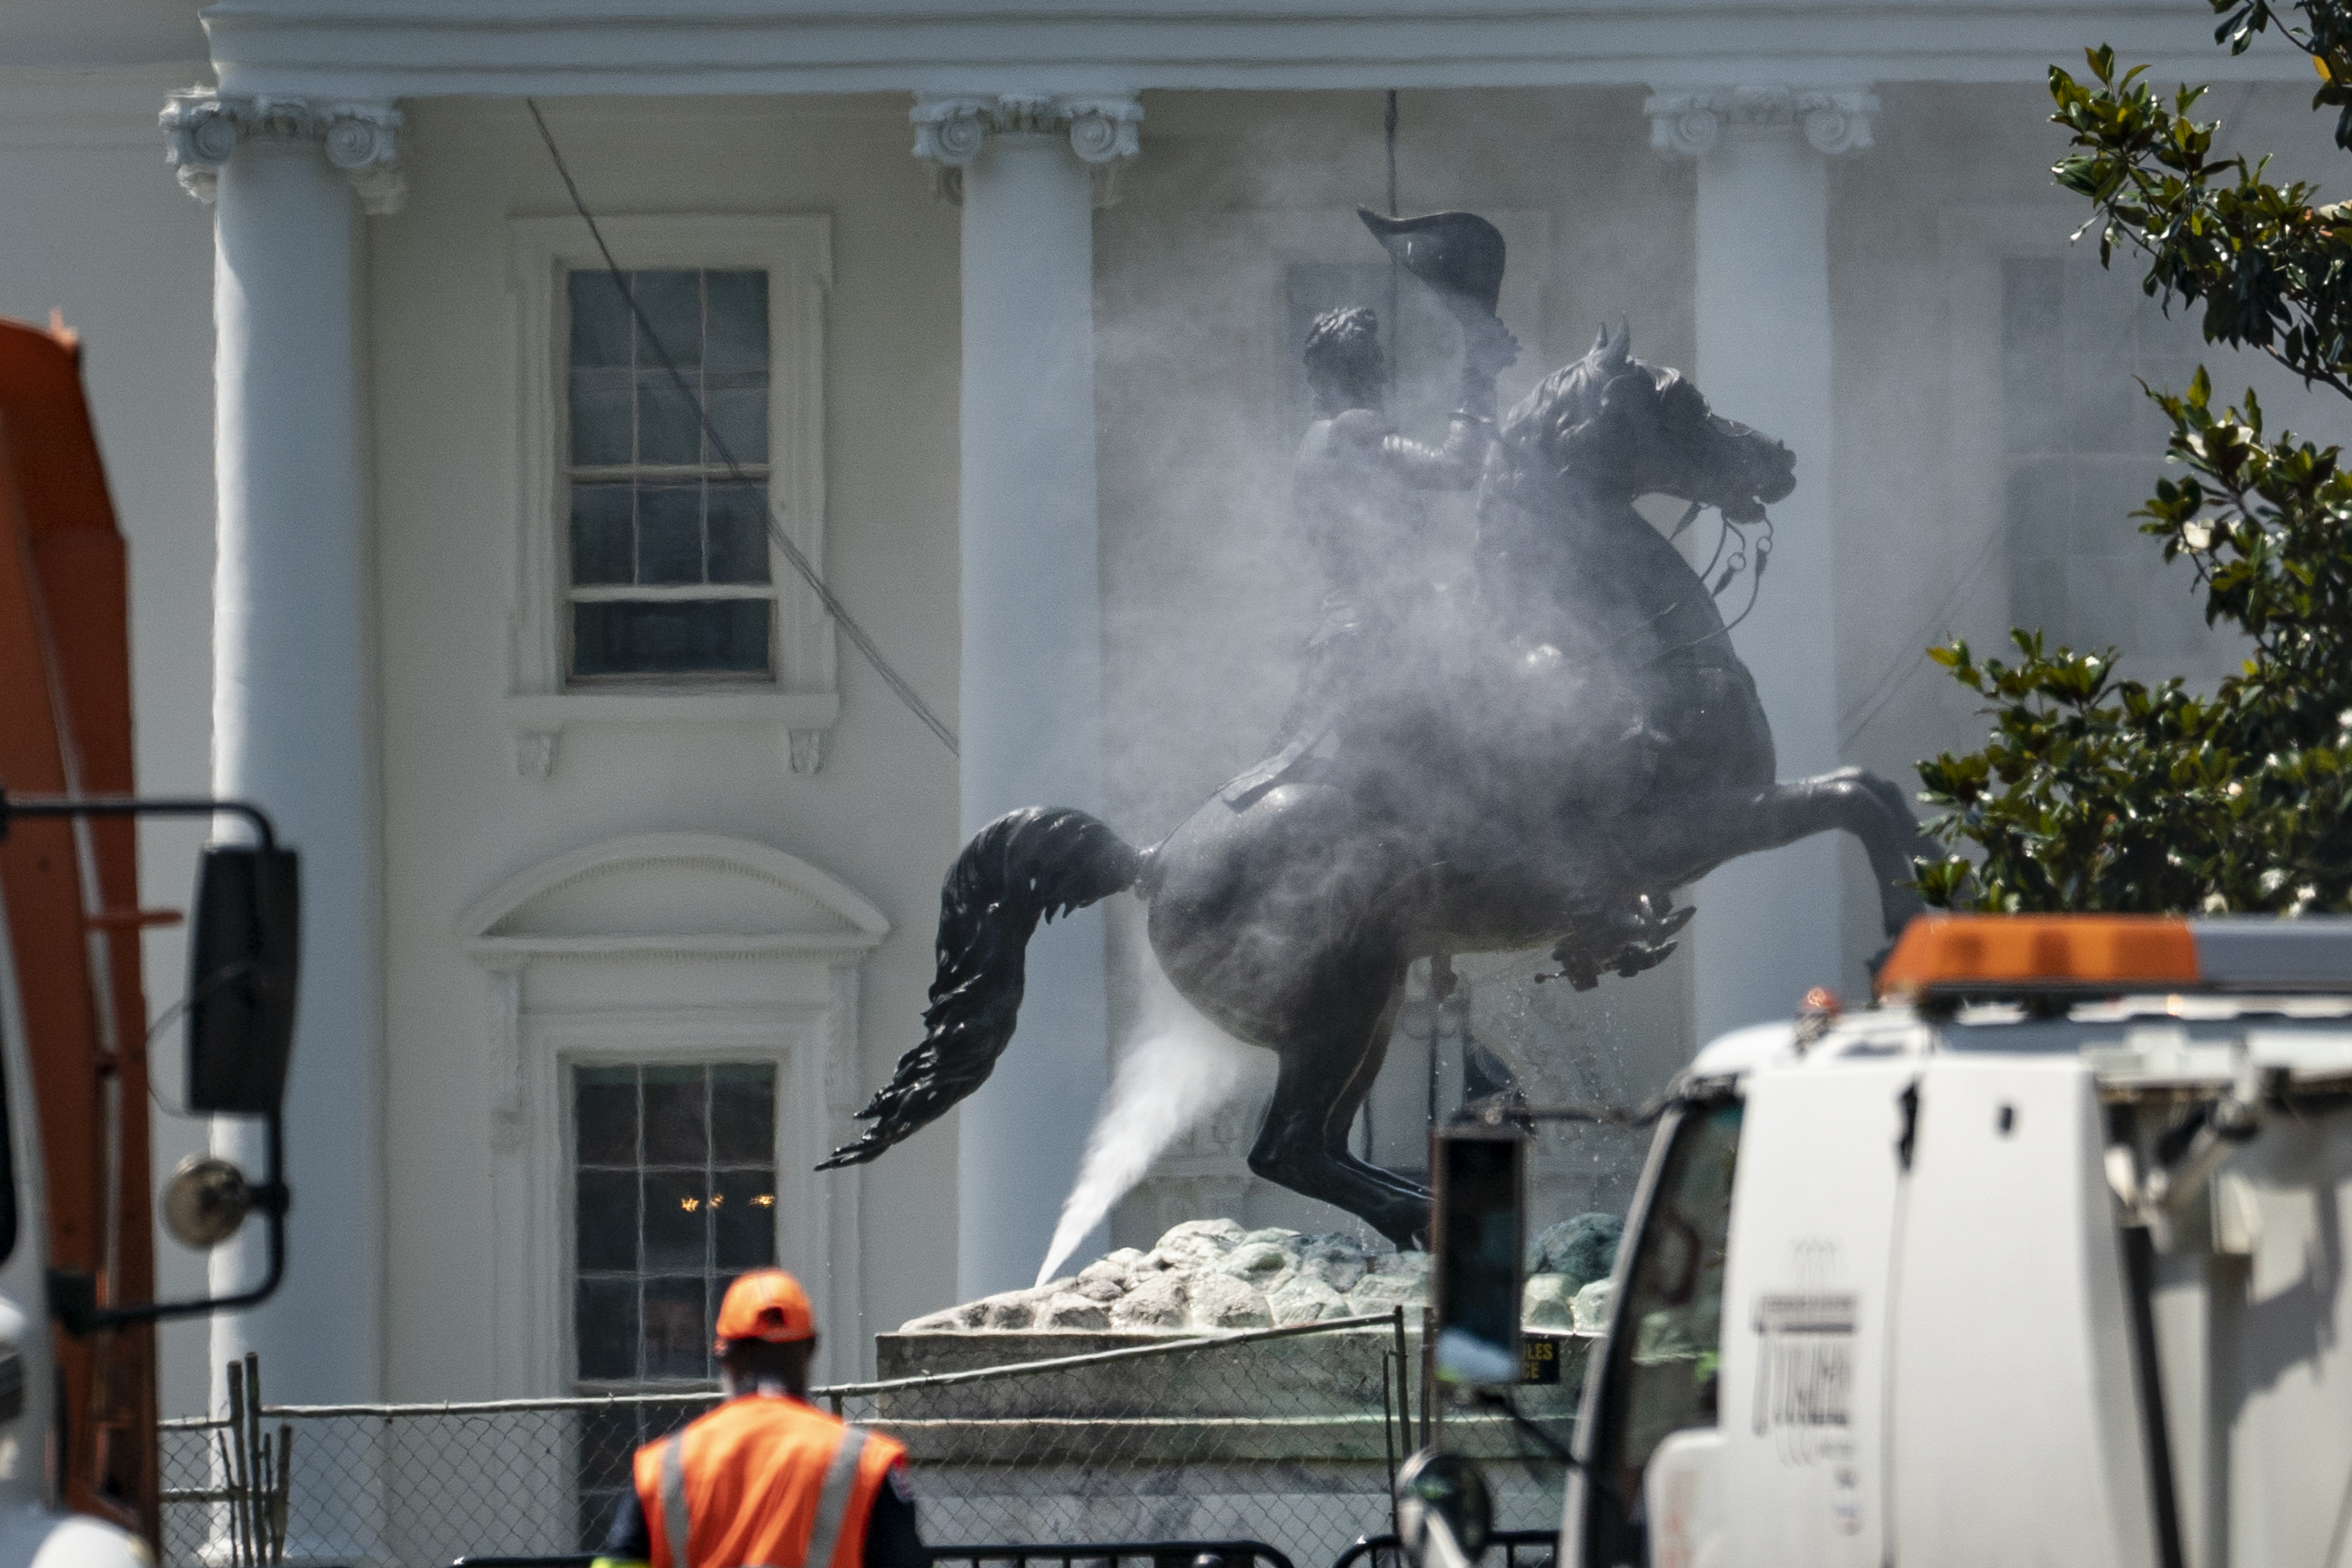 Workers clean the statue of Andrew Jackson in Lafayette Square